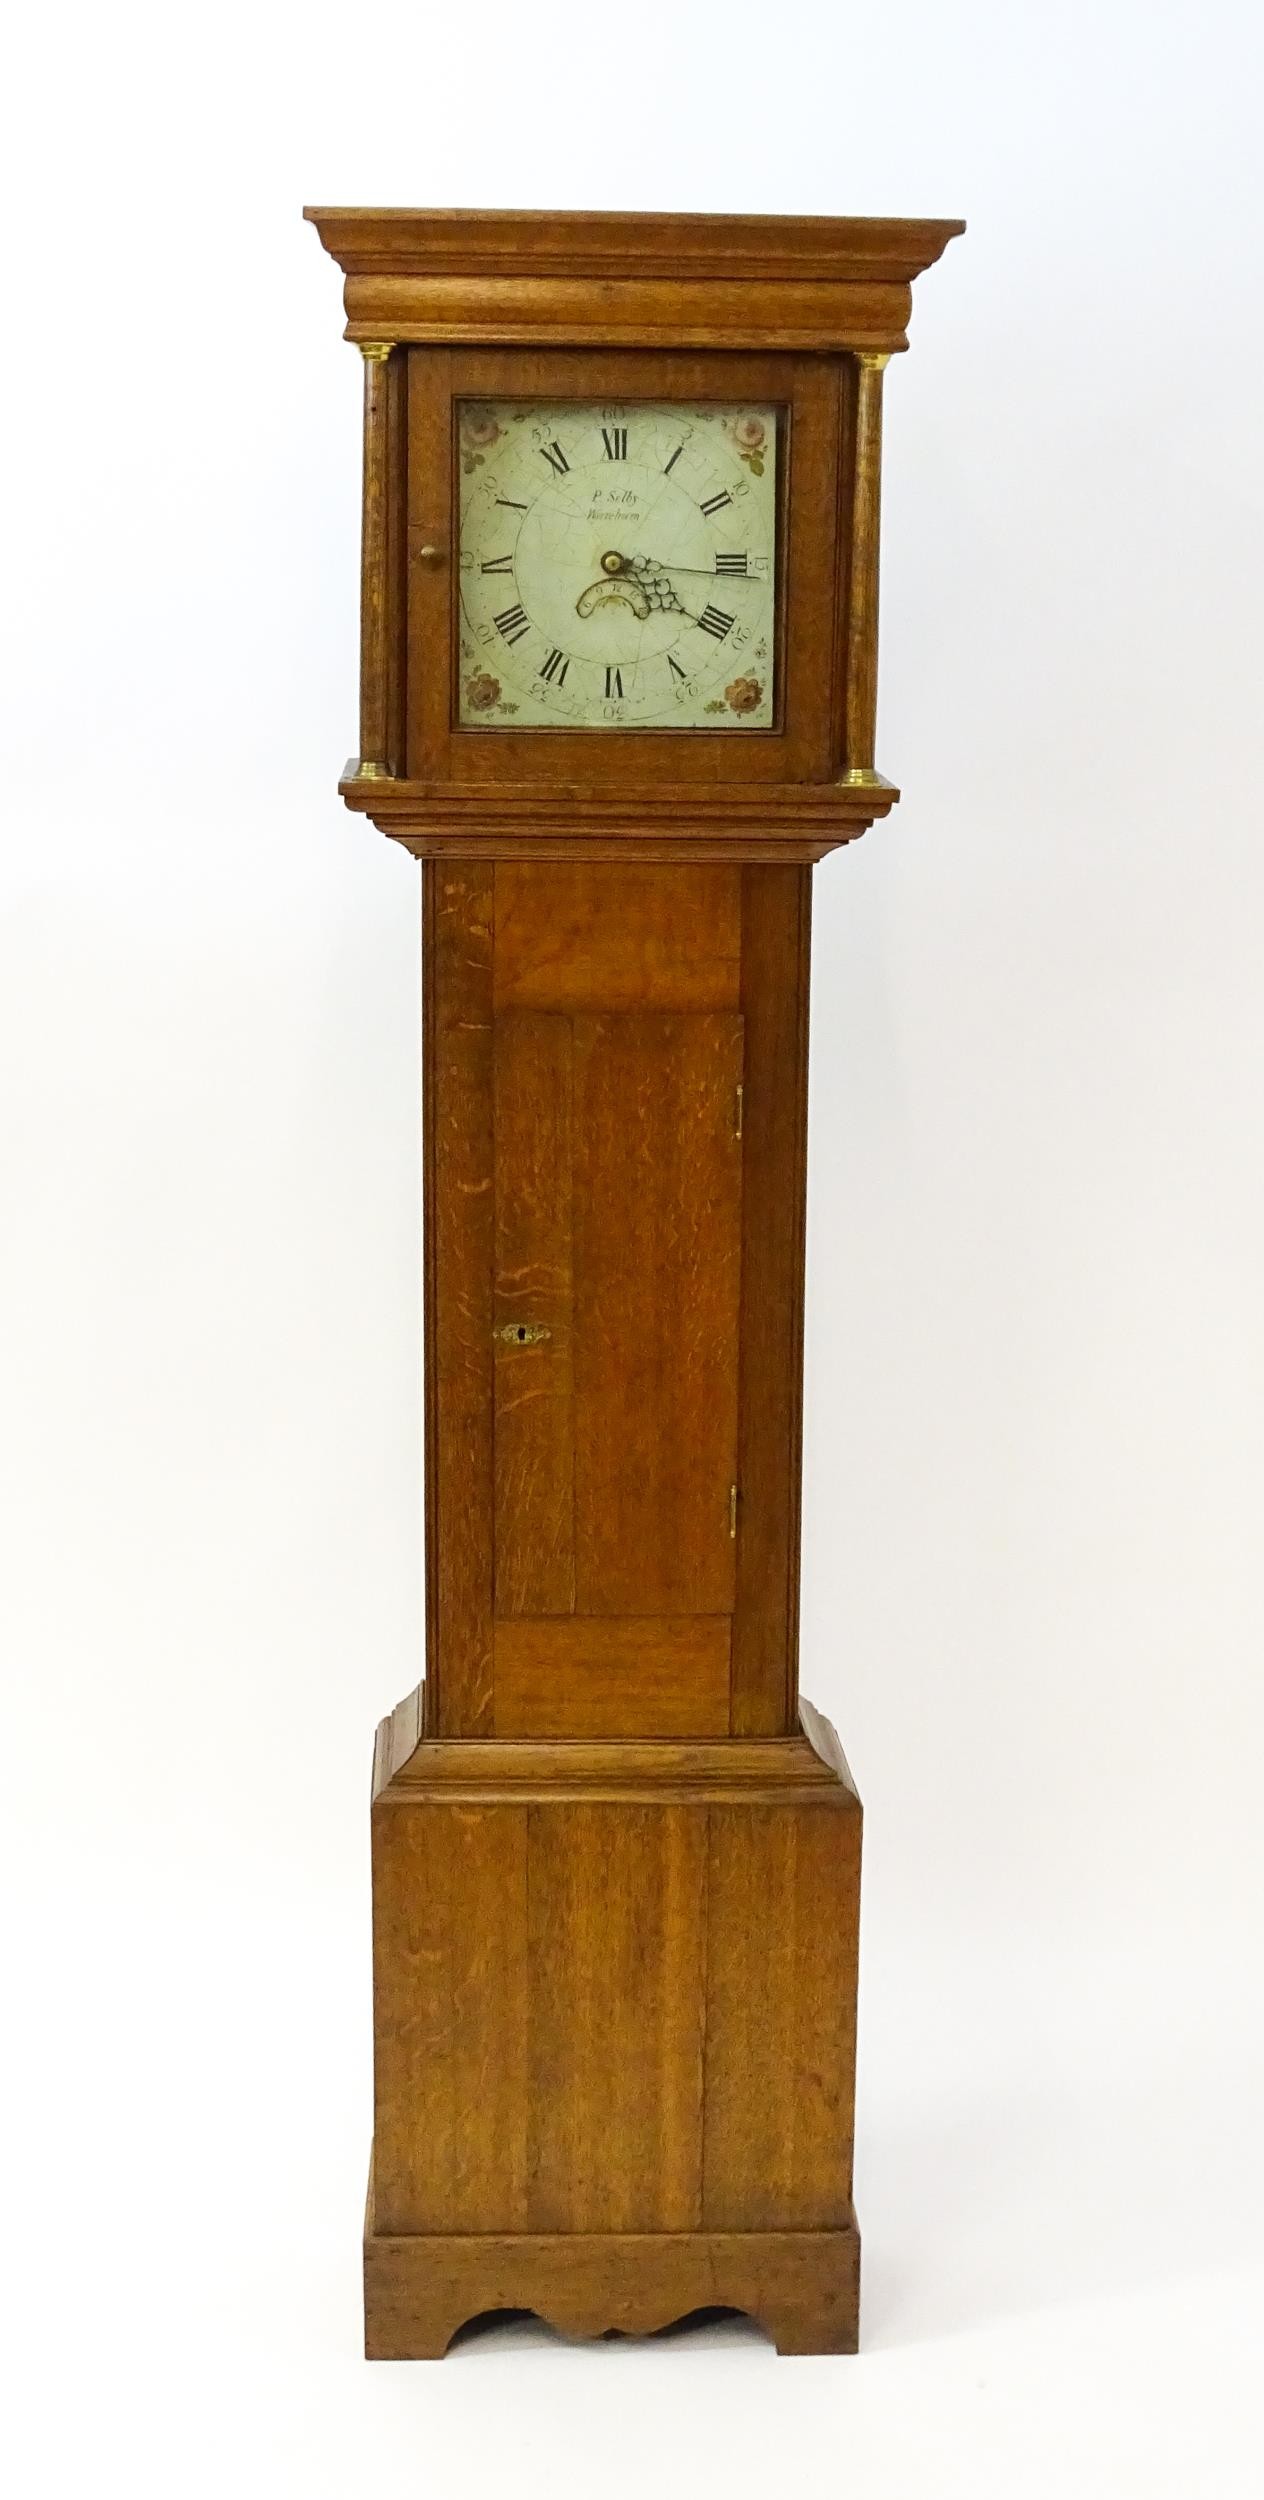 P Selby Wareham - Dorset : A late 18thC oak cased 30 hour longcase clock, the painted dial signed P. - Image 6 of 12